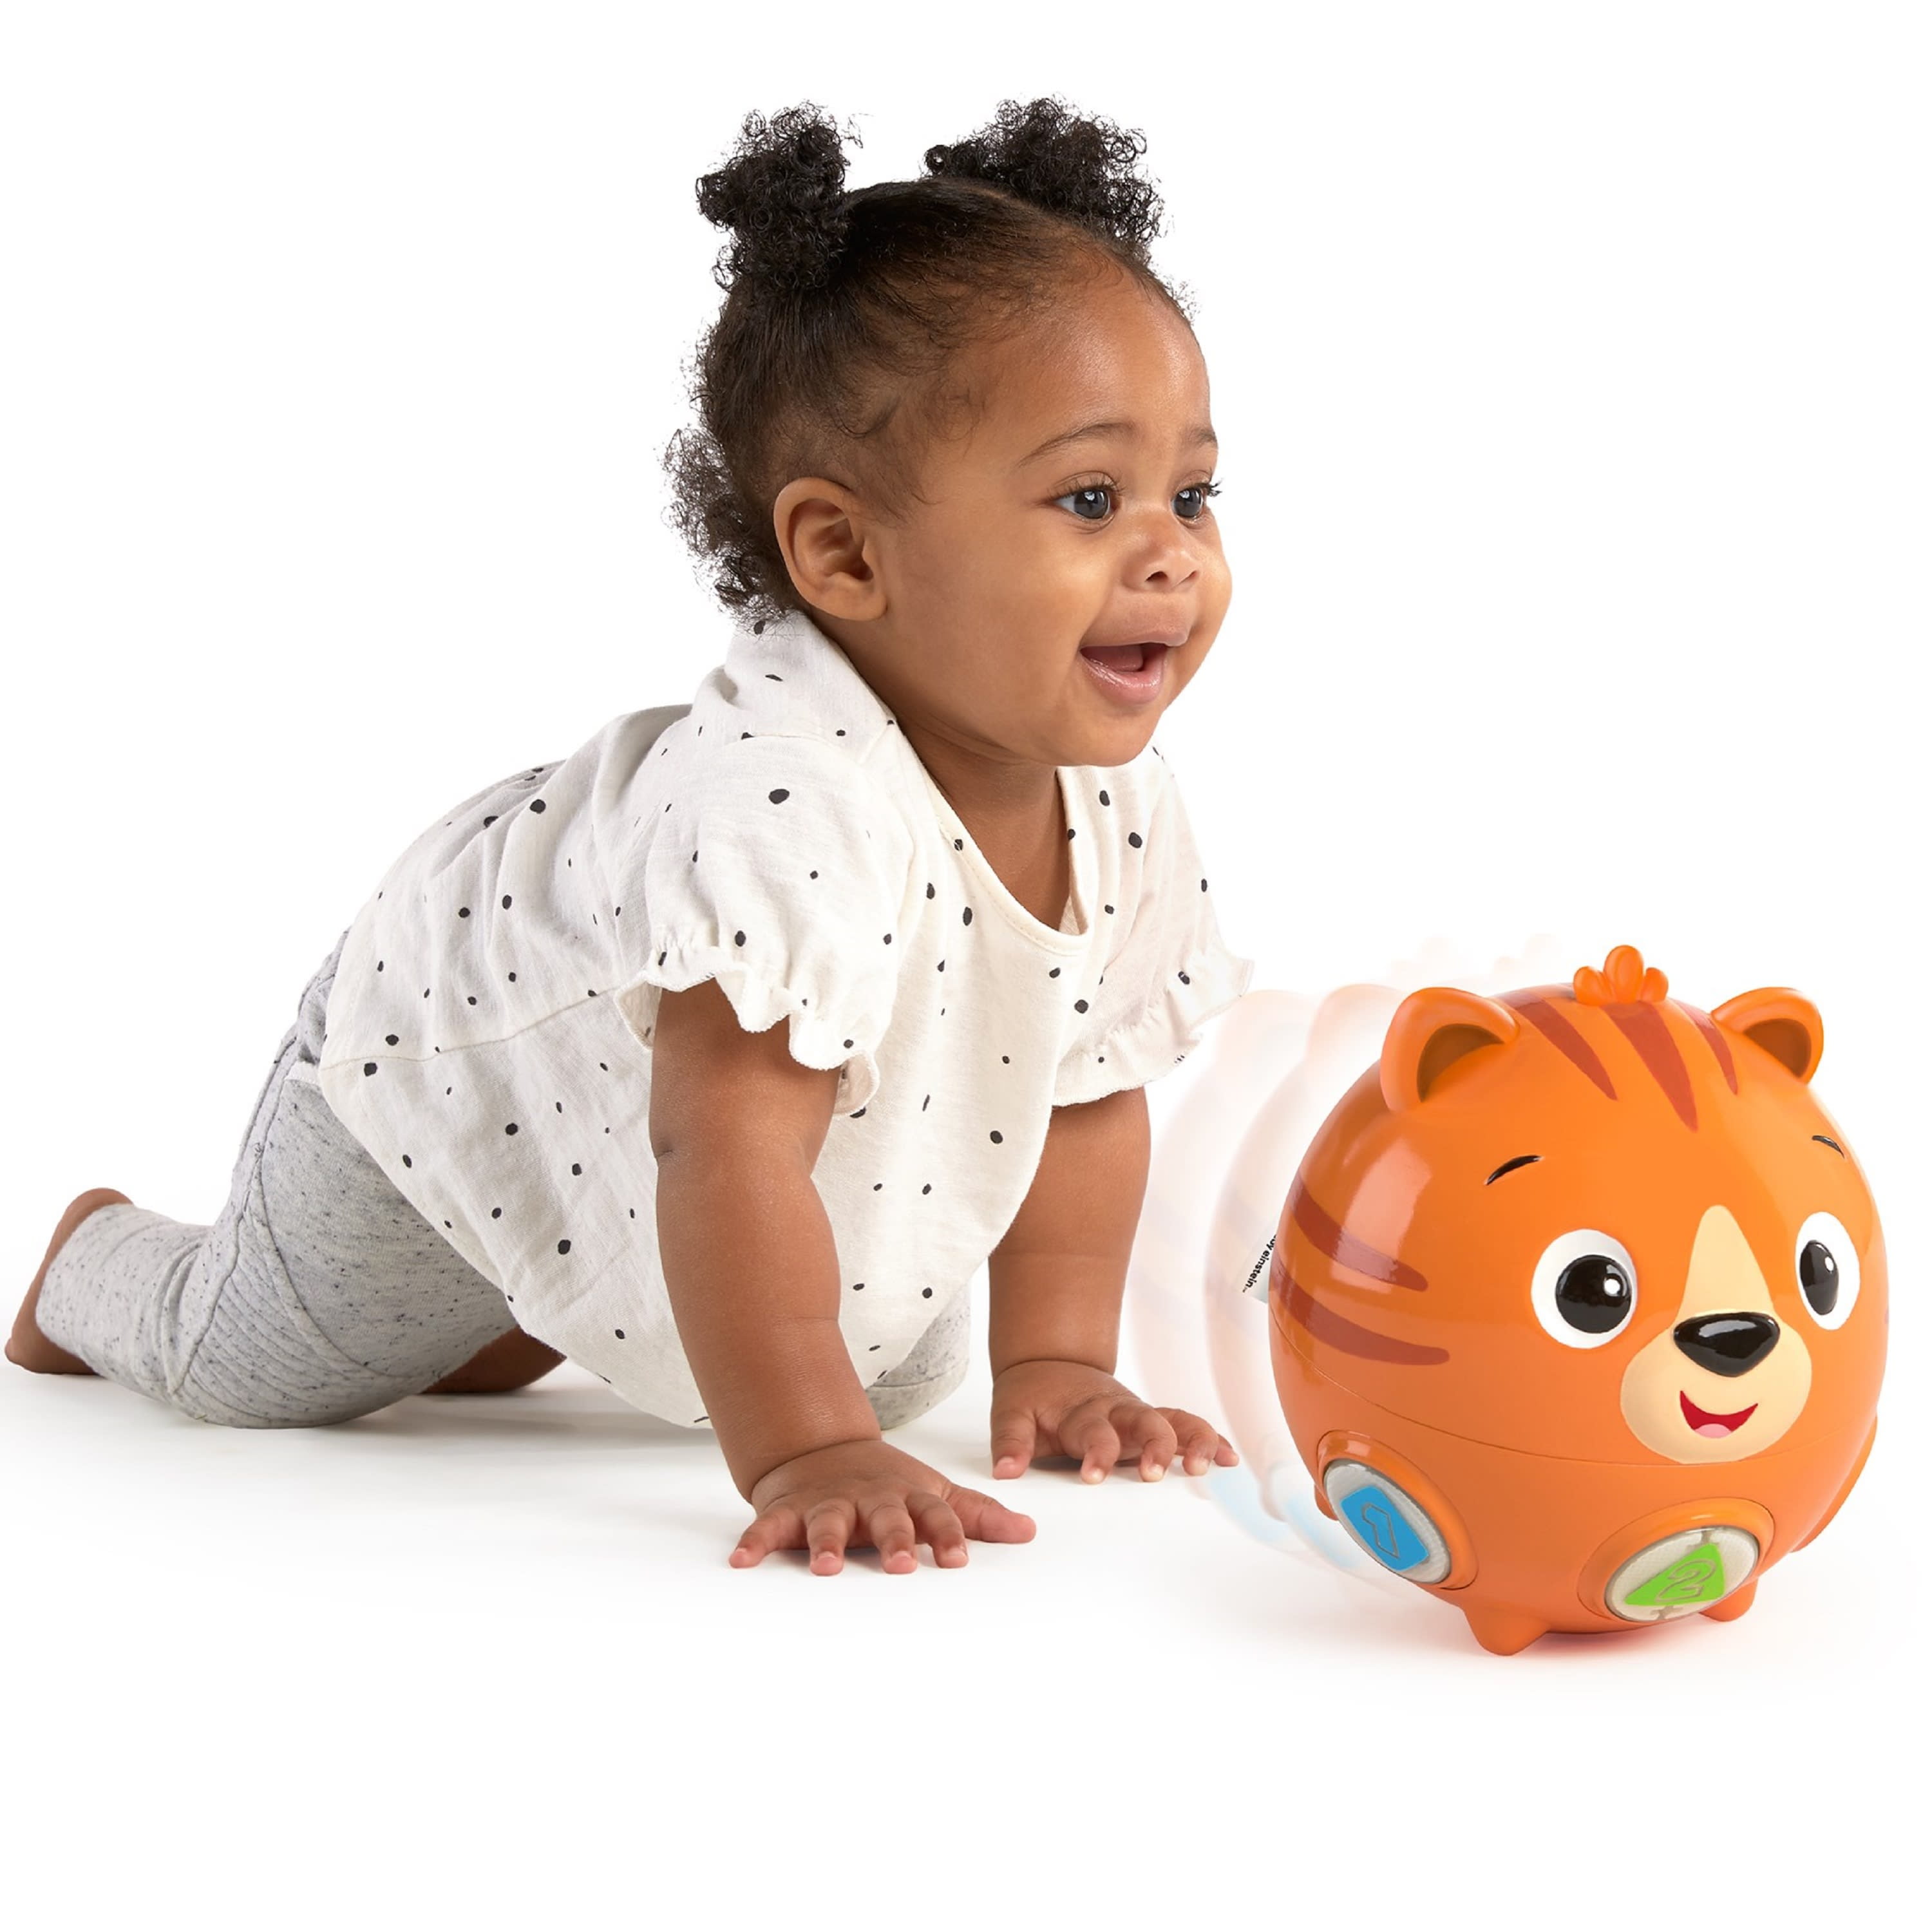 Baby Einstein Tinkers Crawl Along Songs Tummy-Time Musical Baby Toy with Lights for Infants 6 months + Unisex